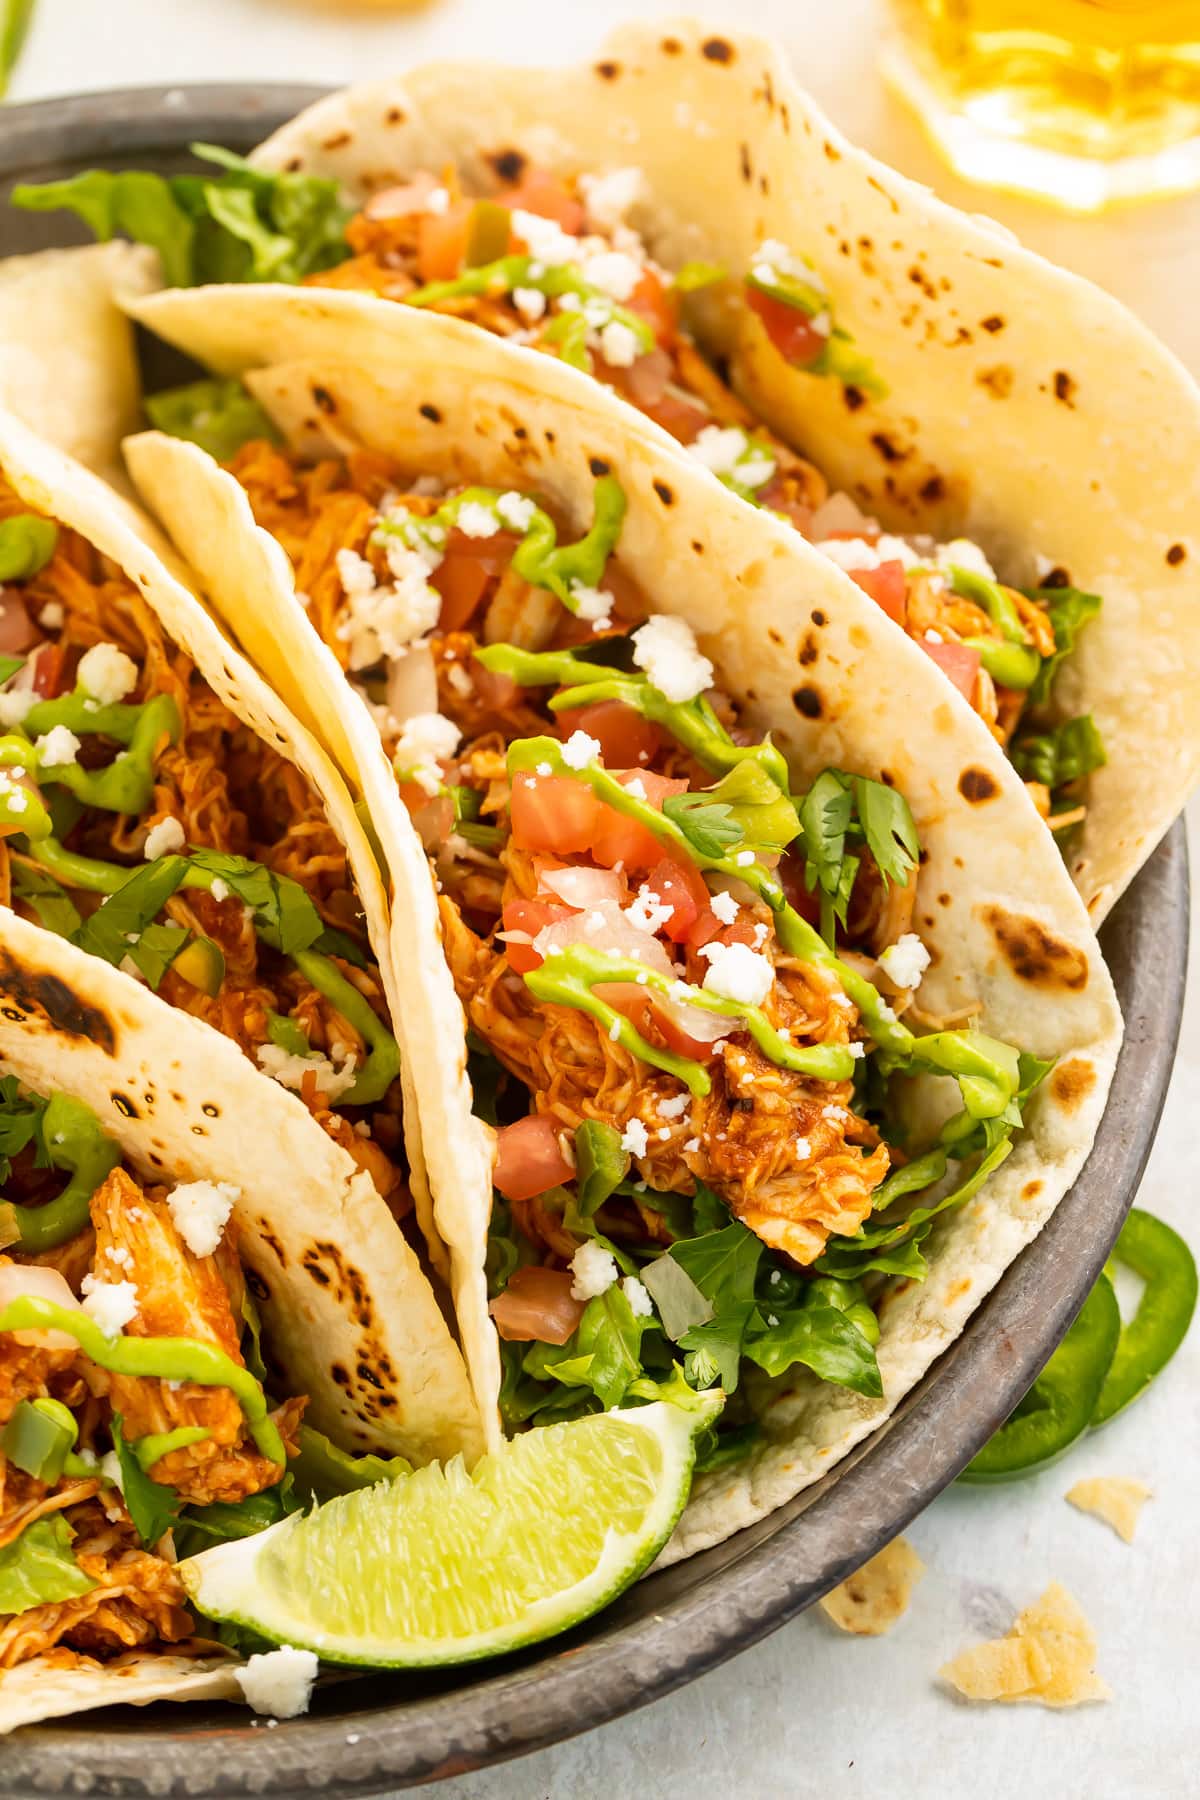 Close-up look at an Instant Pot chicken taco with shredded chicken, tomatoes, lettuce, cilantro, cheese, and a lime wedge.